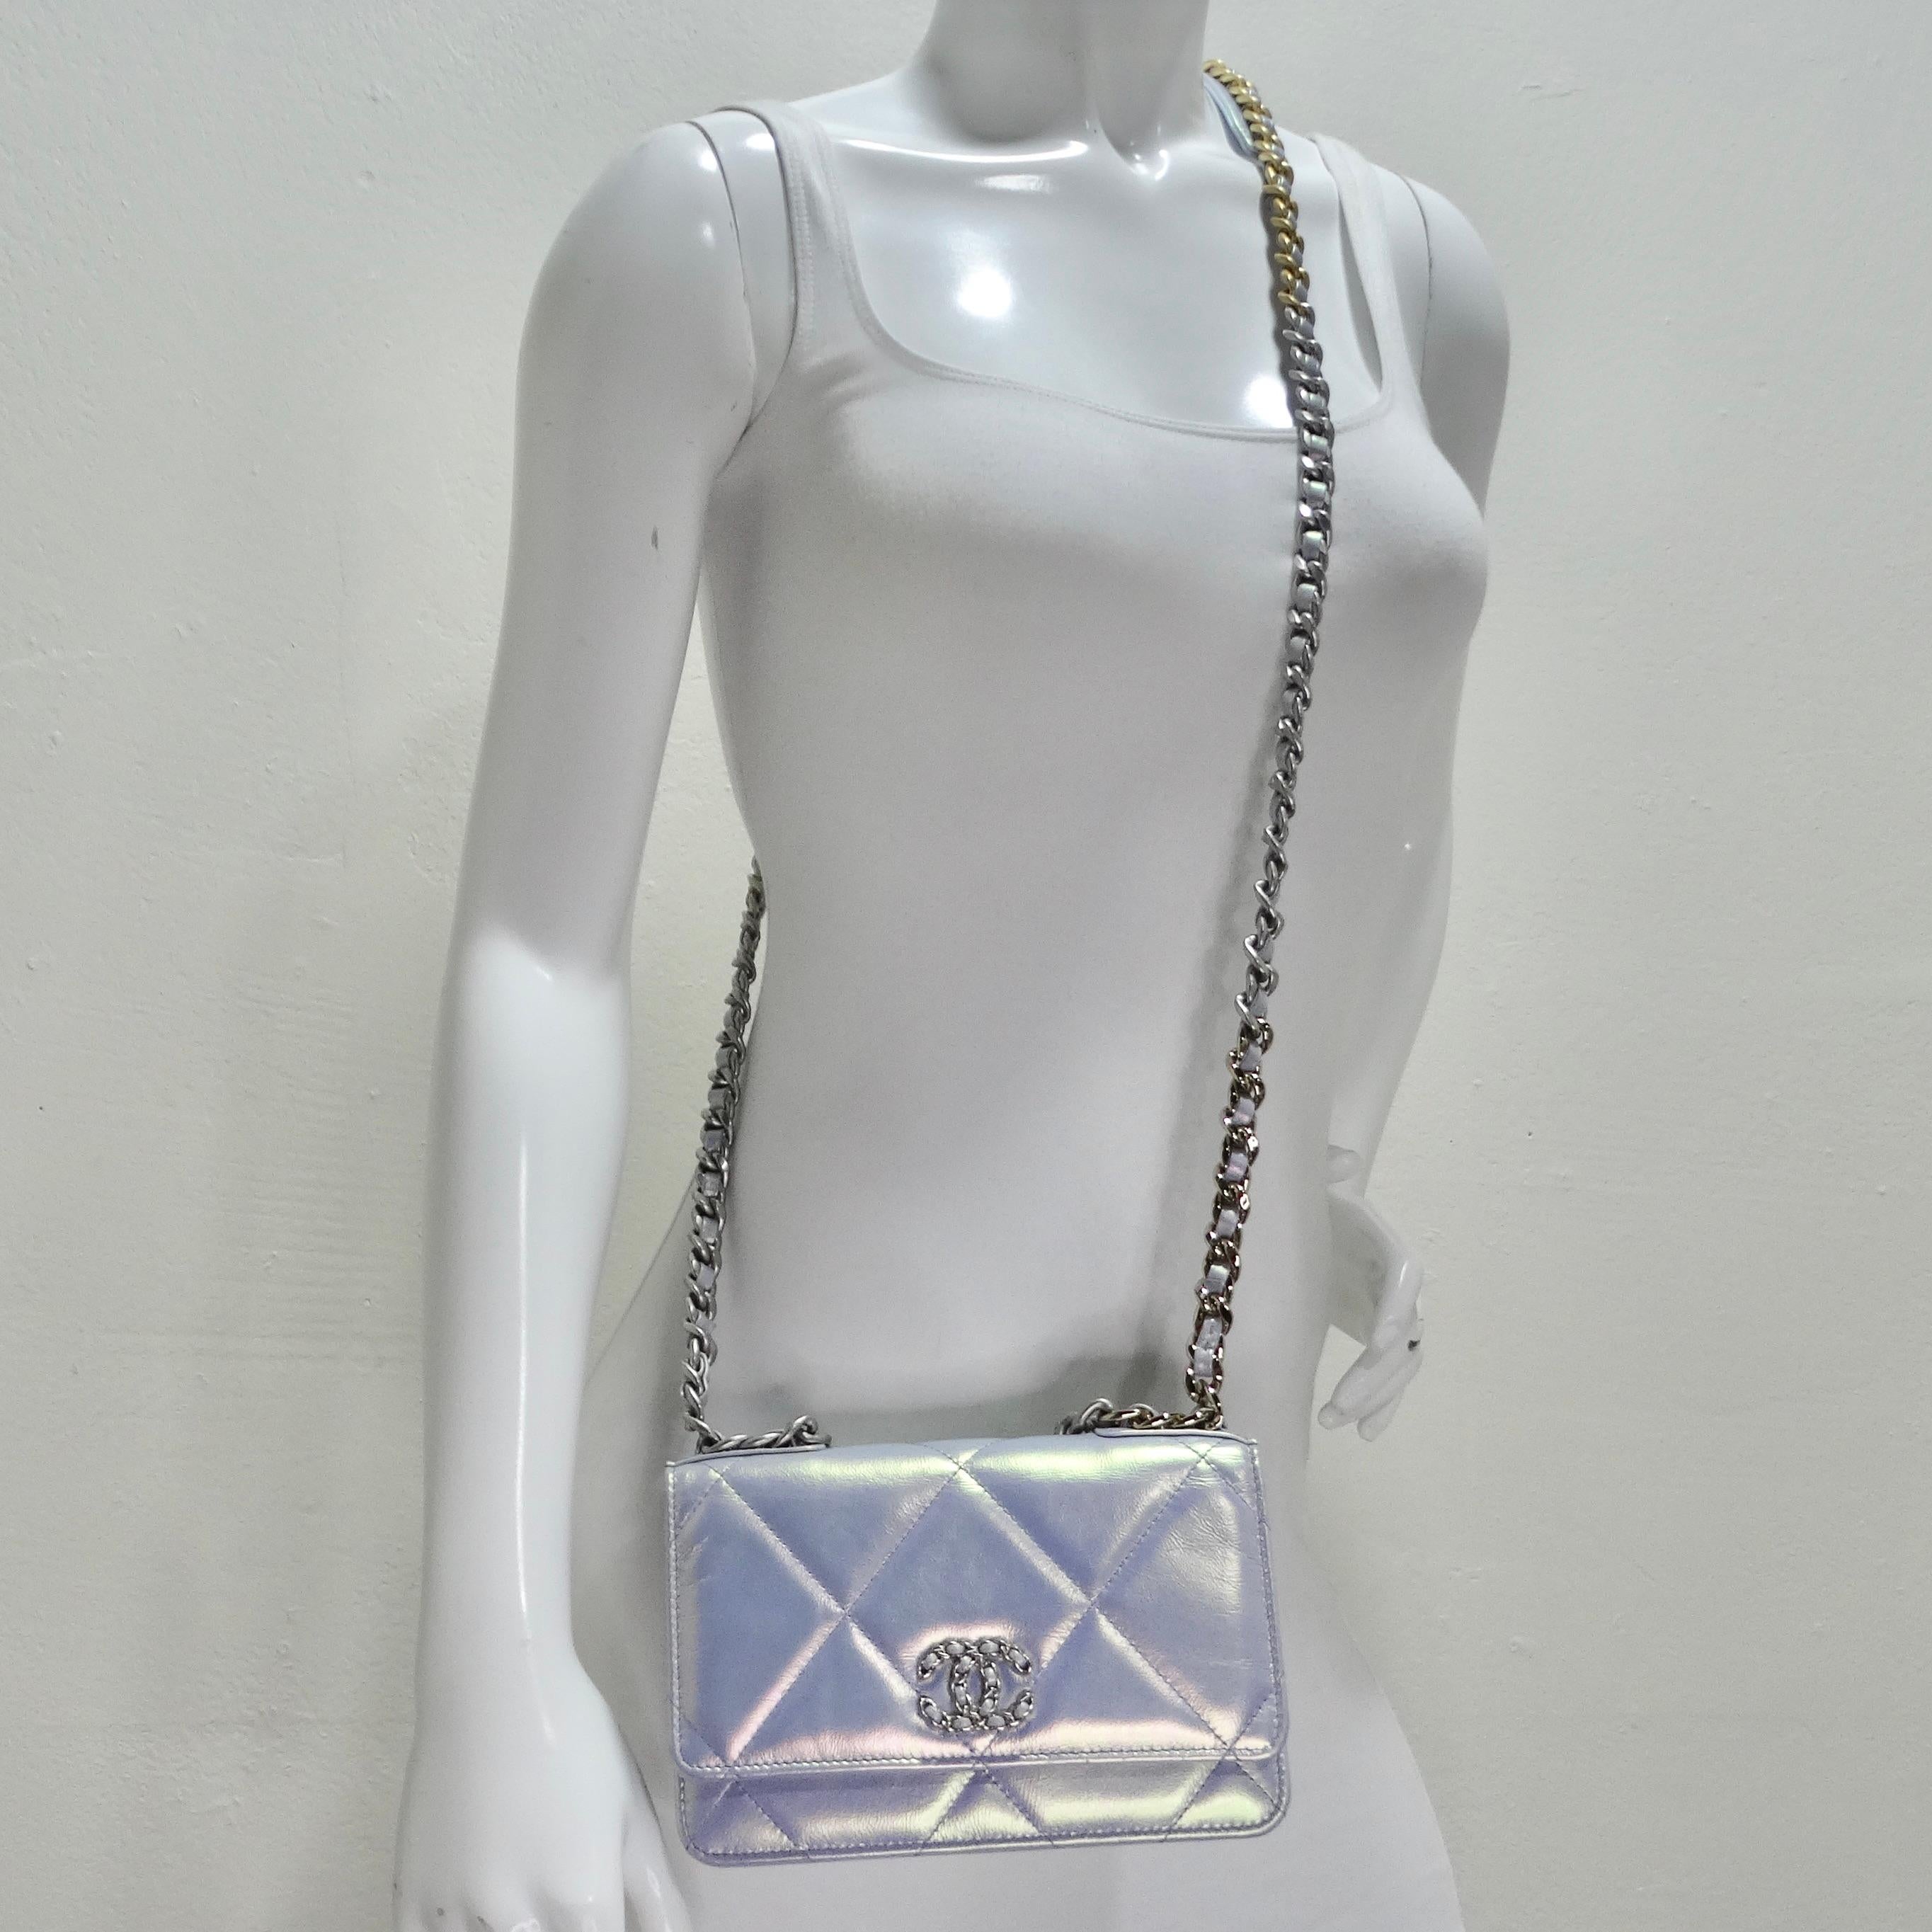 Gray Iridescent Calfskin Quilted Medium Chanel 19 Flap Bag For Sale